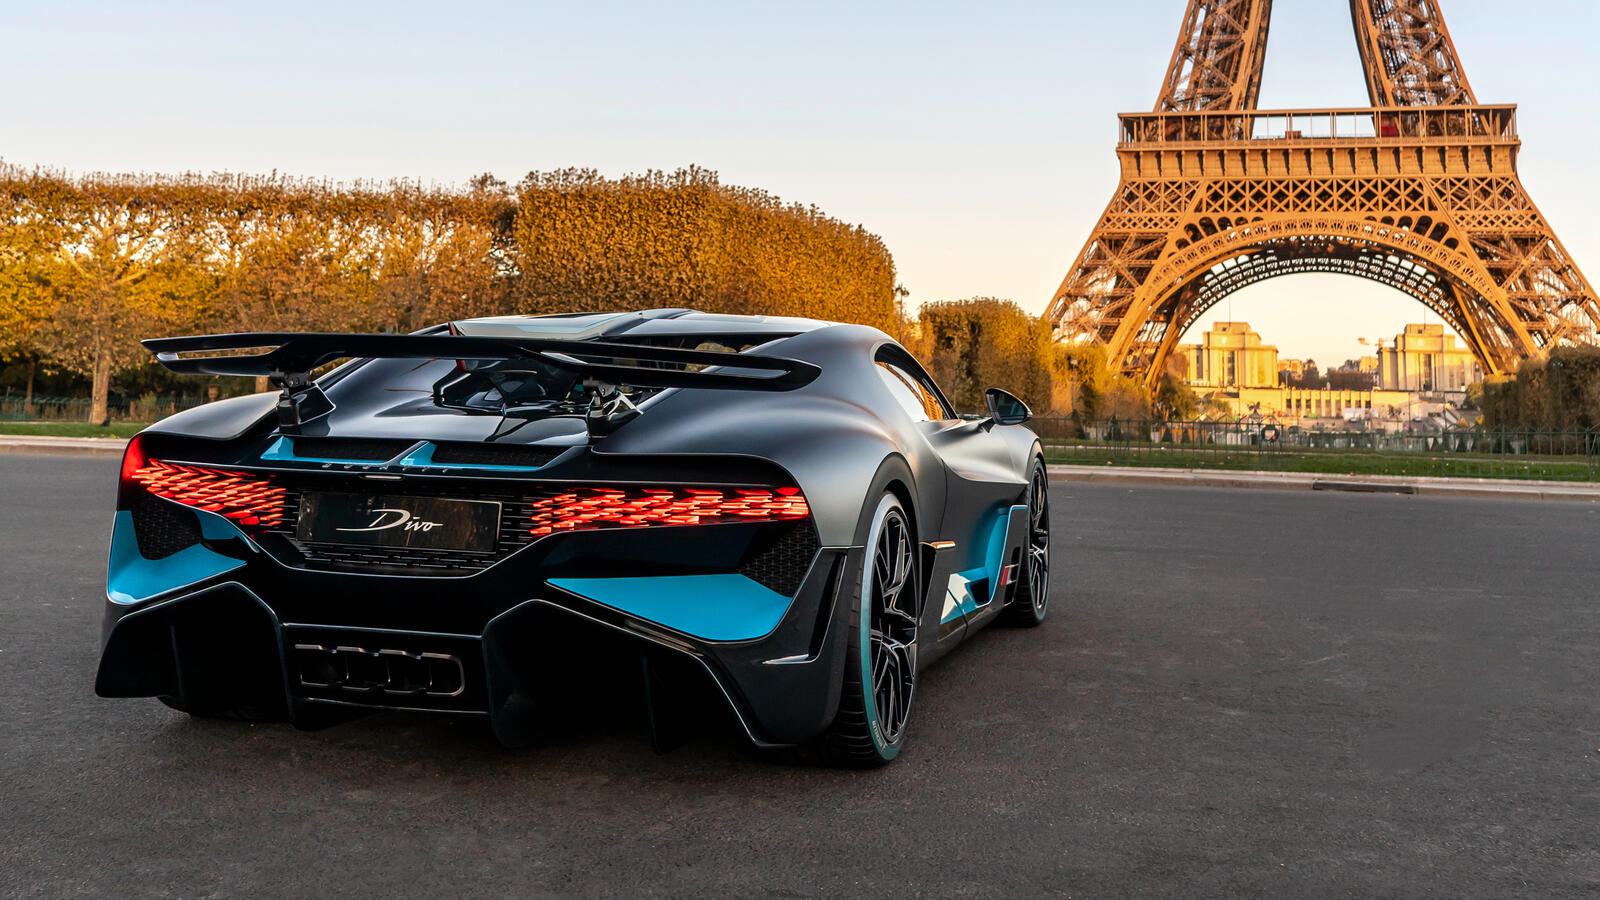 Free photo Bugatti Divo in front of the Eiffel Tower.